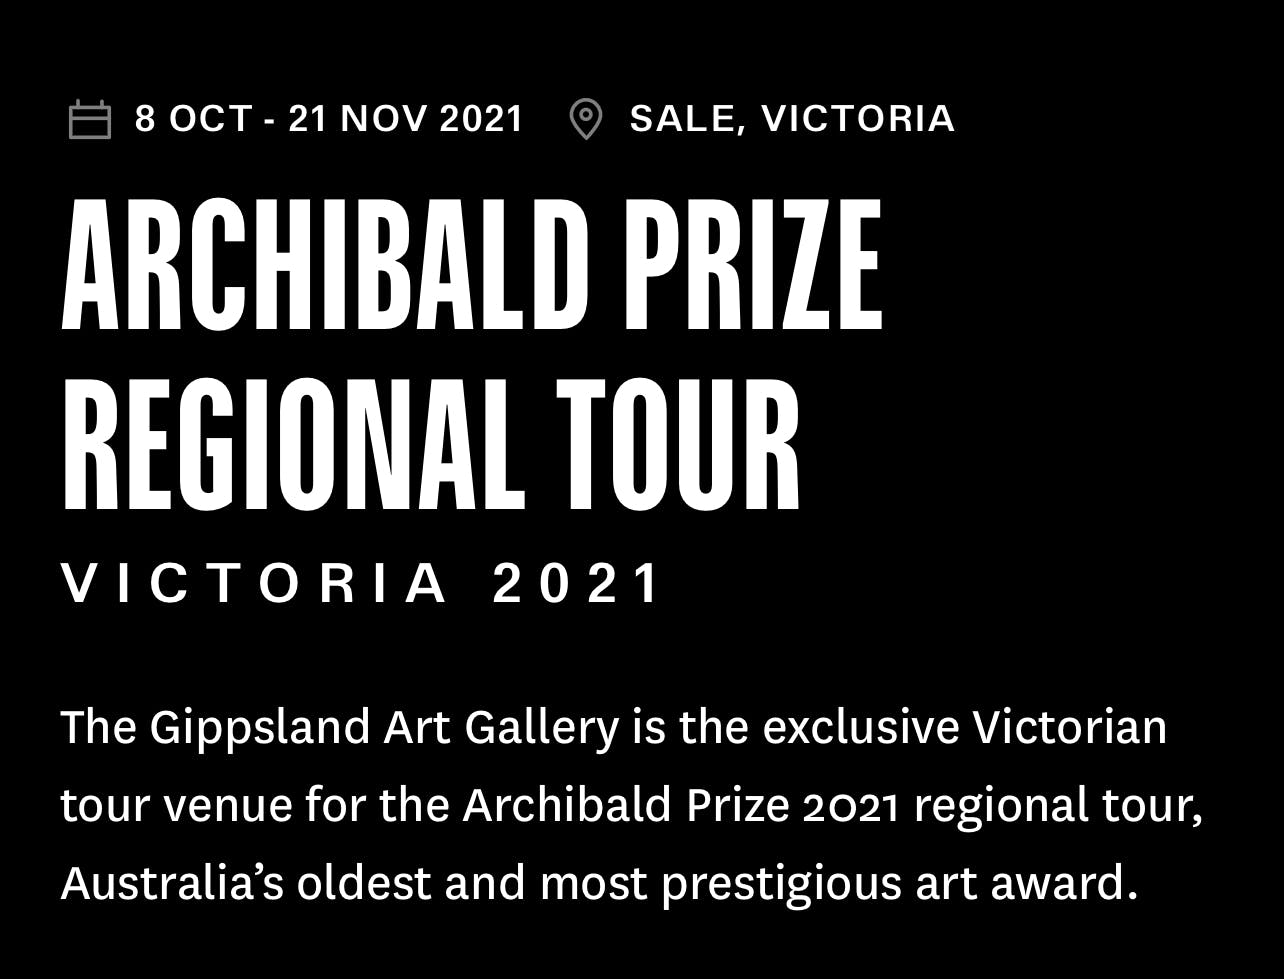 Gippsland Art Gallery is the exclusive Victorian tour venue for the Archibald Prize 2021 regional tour